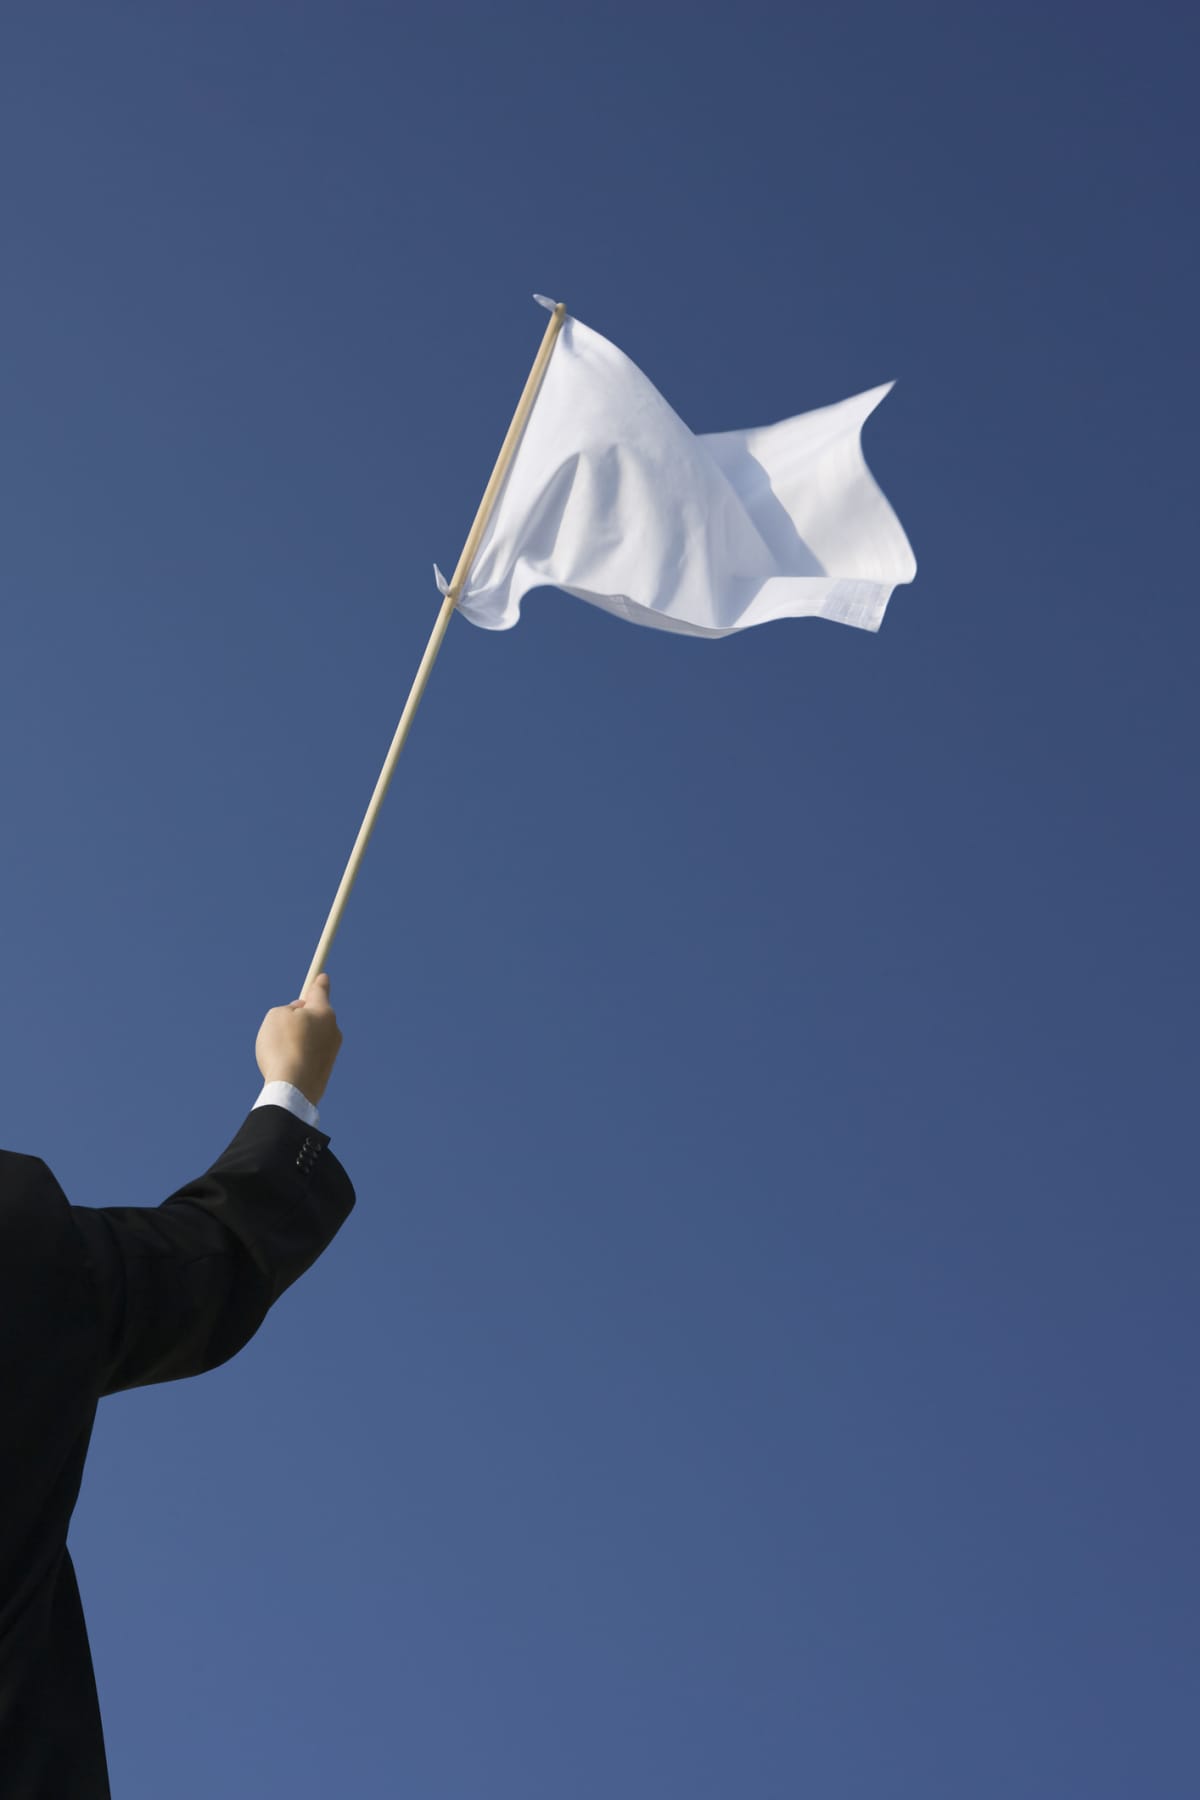 Businessman holding a white flag flutters in the wind against a blue sky.